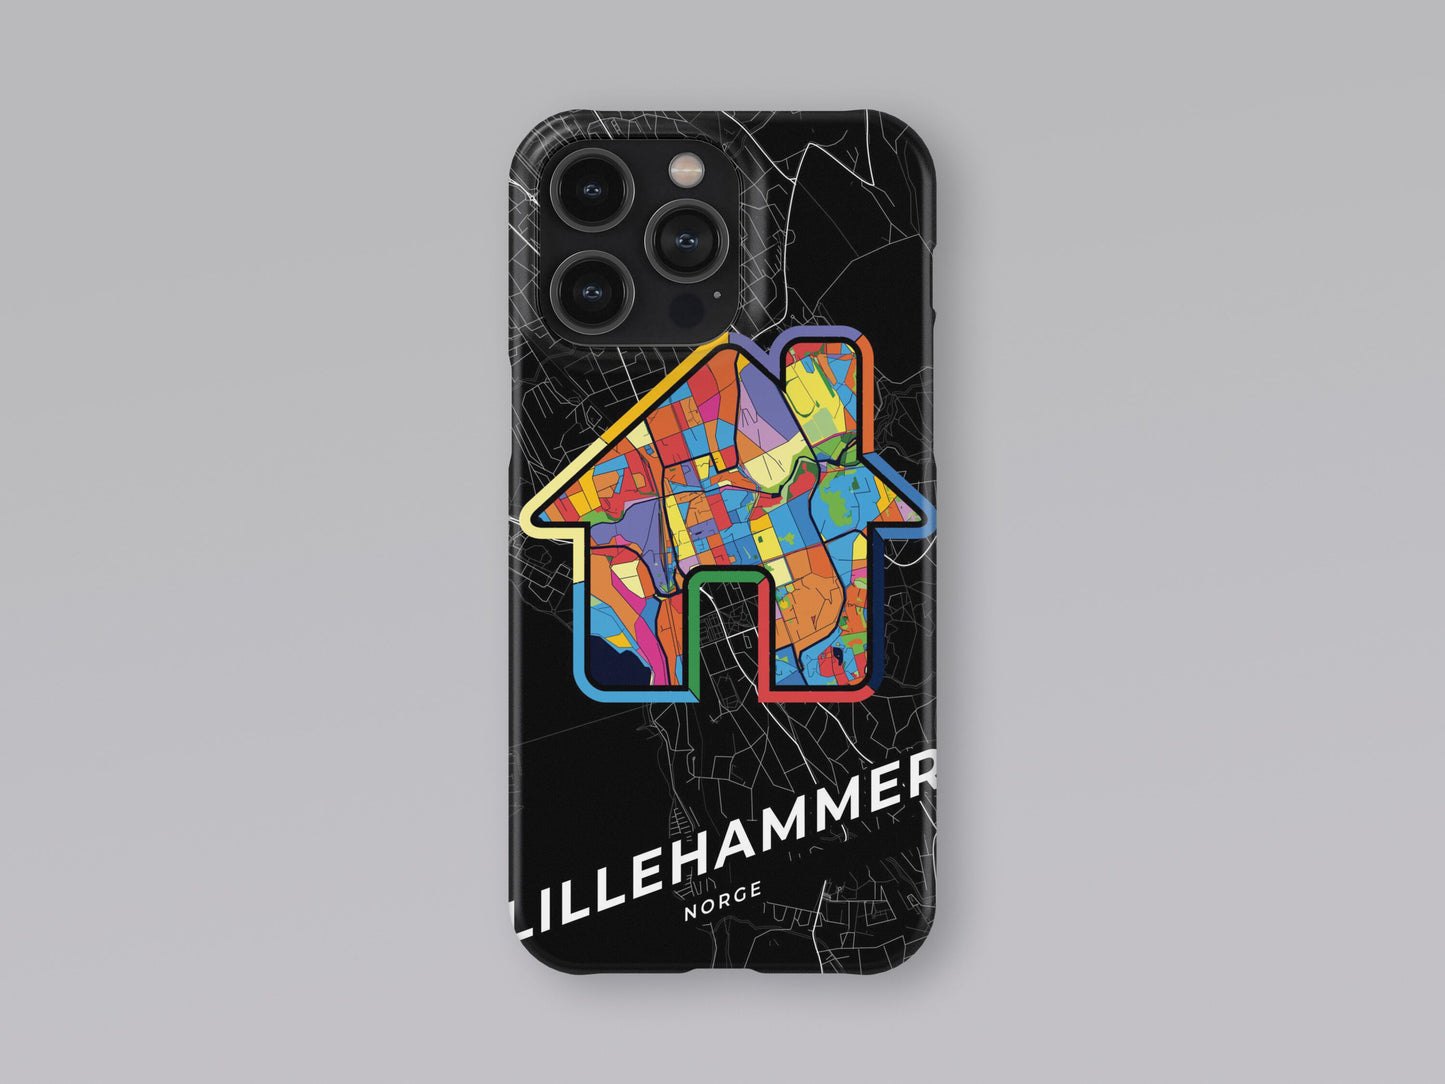 Lillehammer Norway slim phone case with colorful icon. Birthday, wedding or housewarming gift. Couple match cases. 3